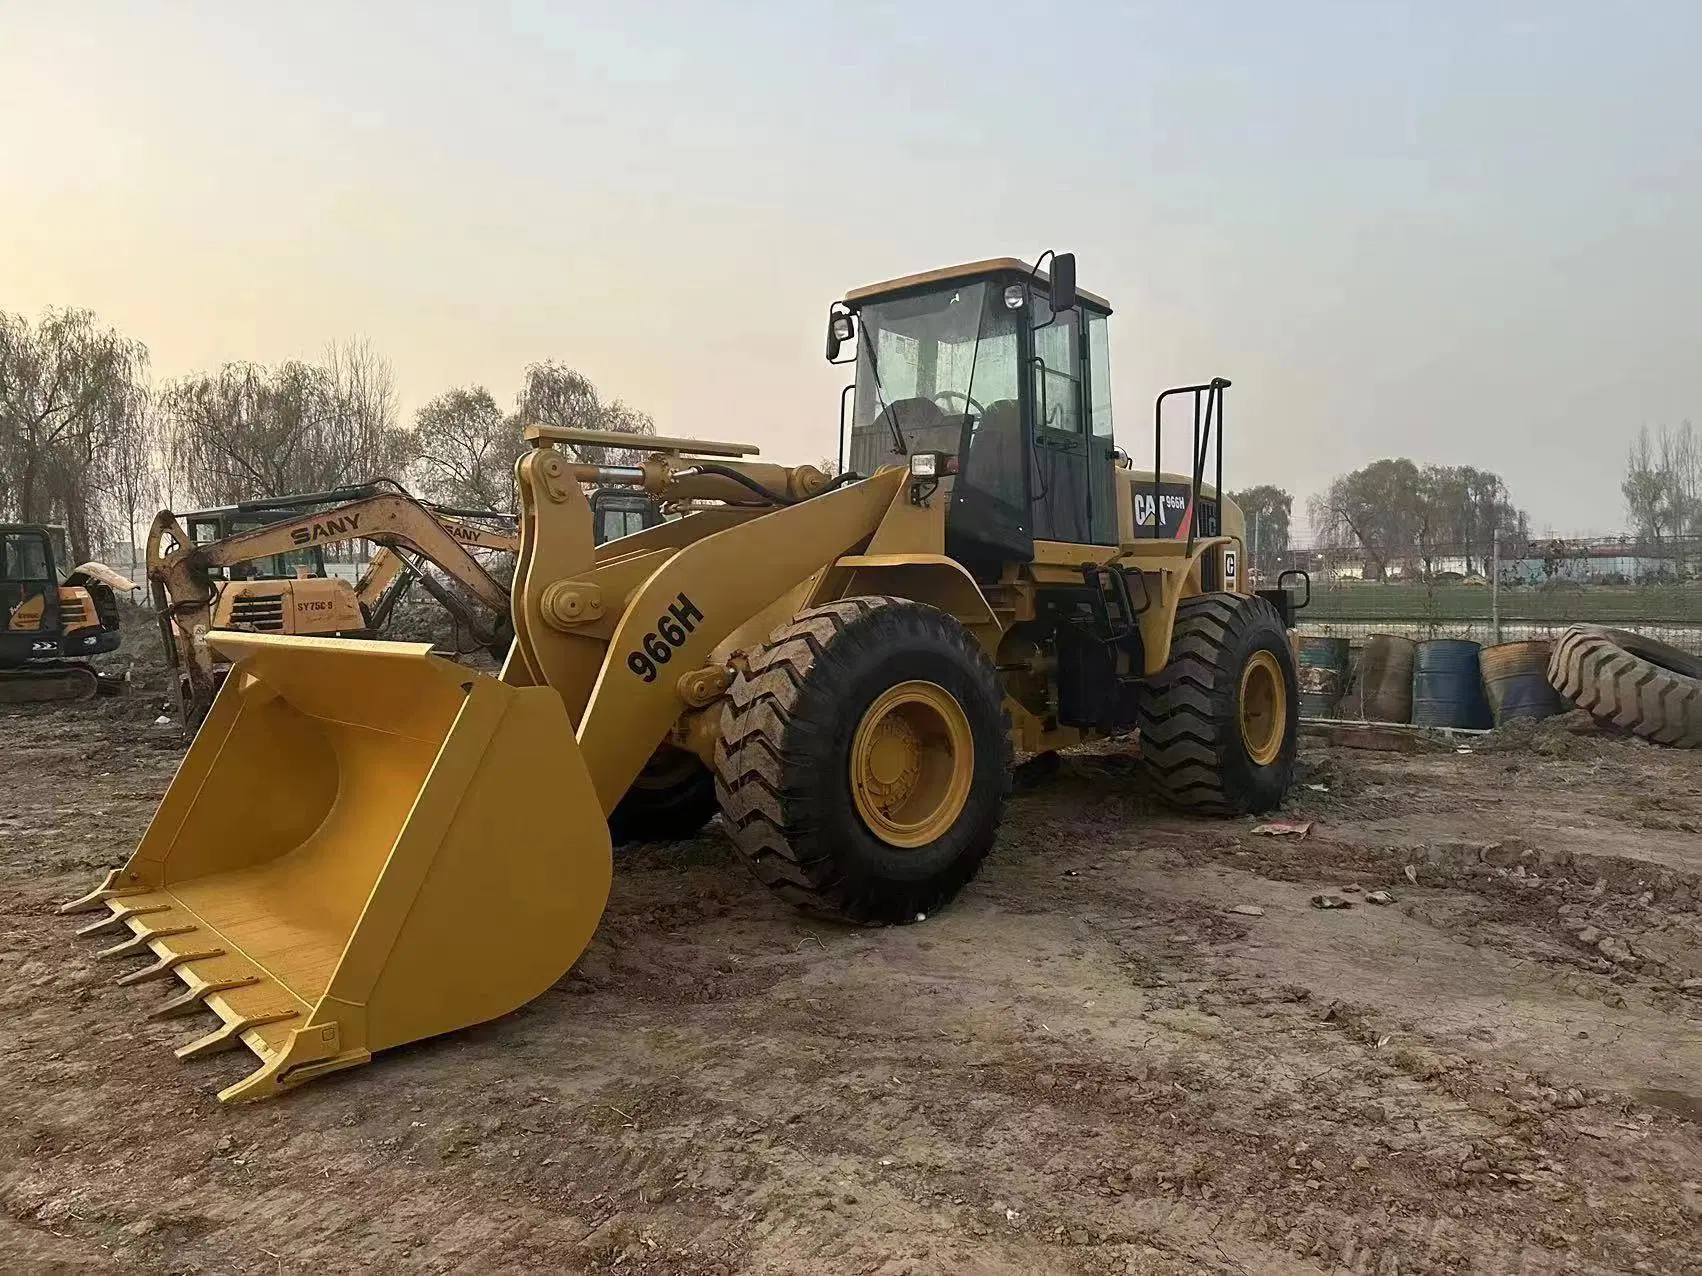 Used caterpillar Wheel Loader Cat 966h for Sale